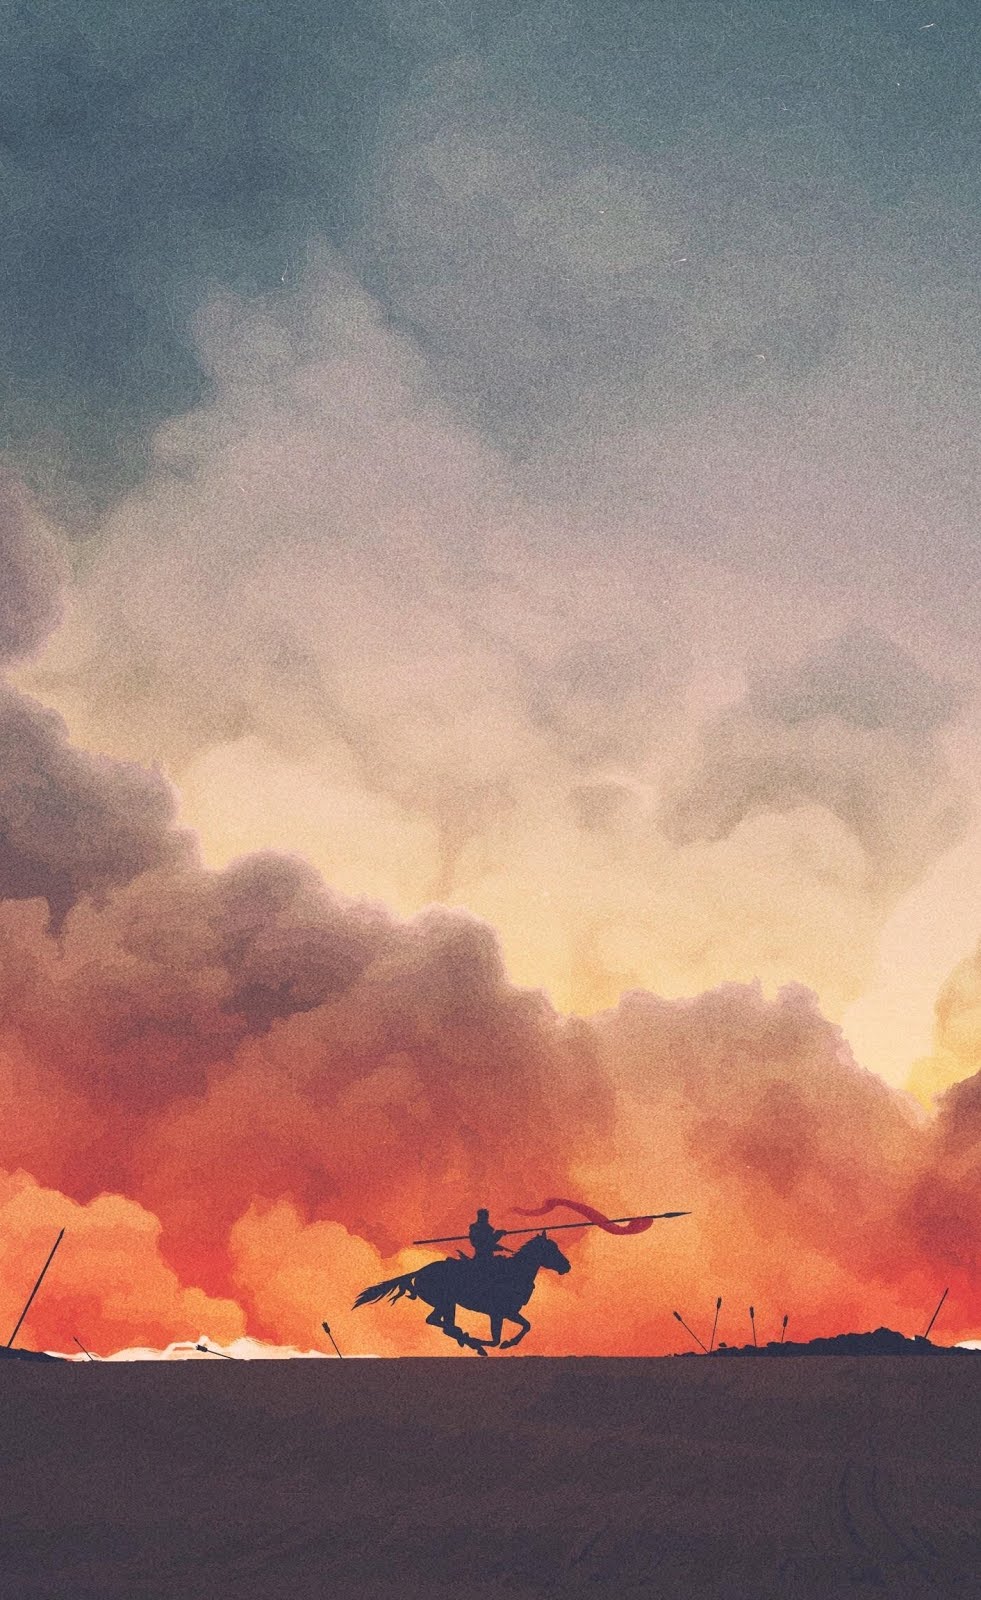 Game of Thrones Phone Wallpaper Free Game of Thrones Phone Background